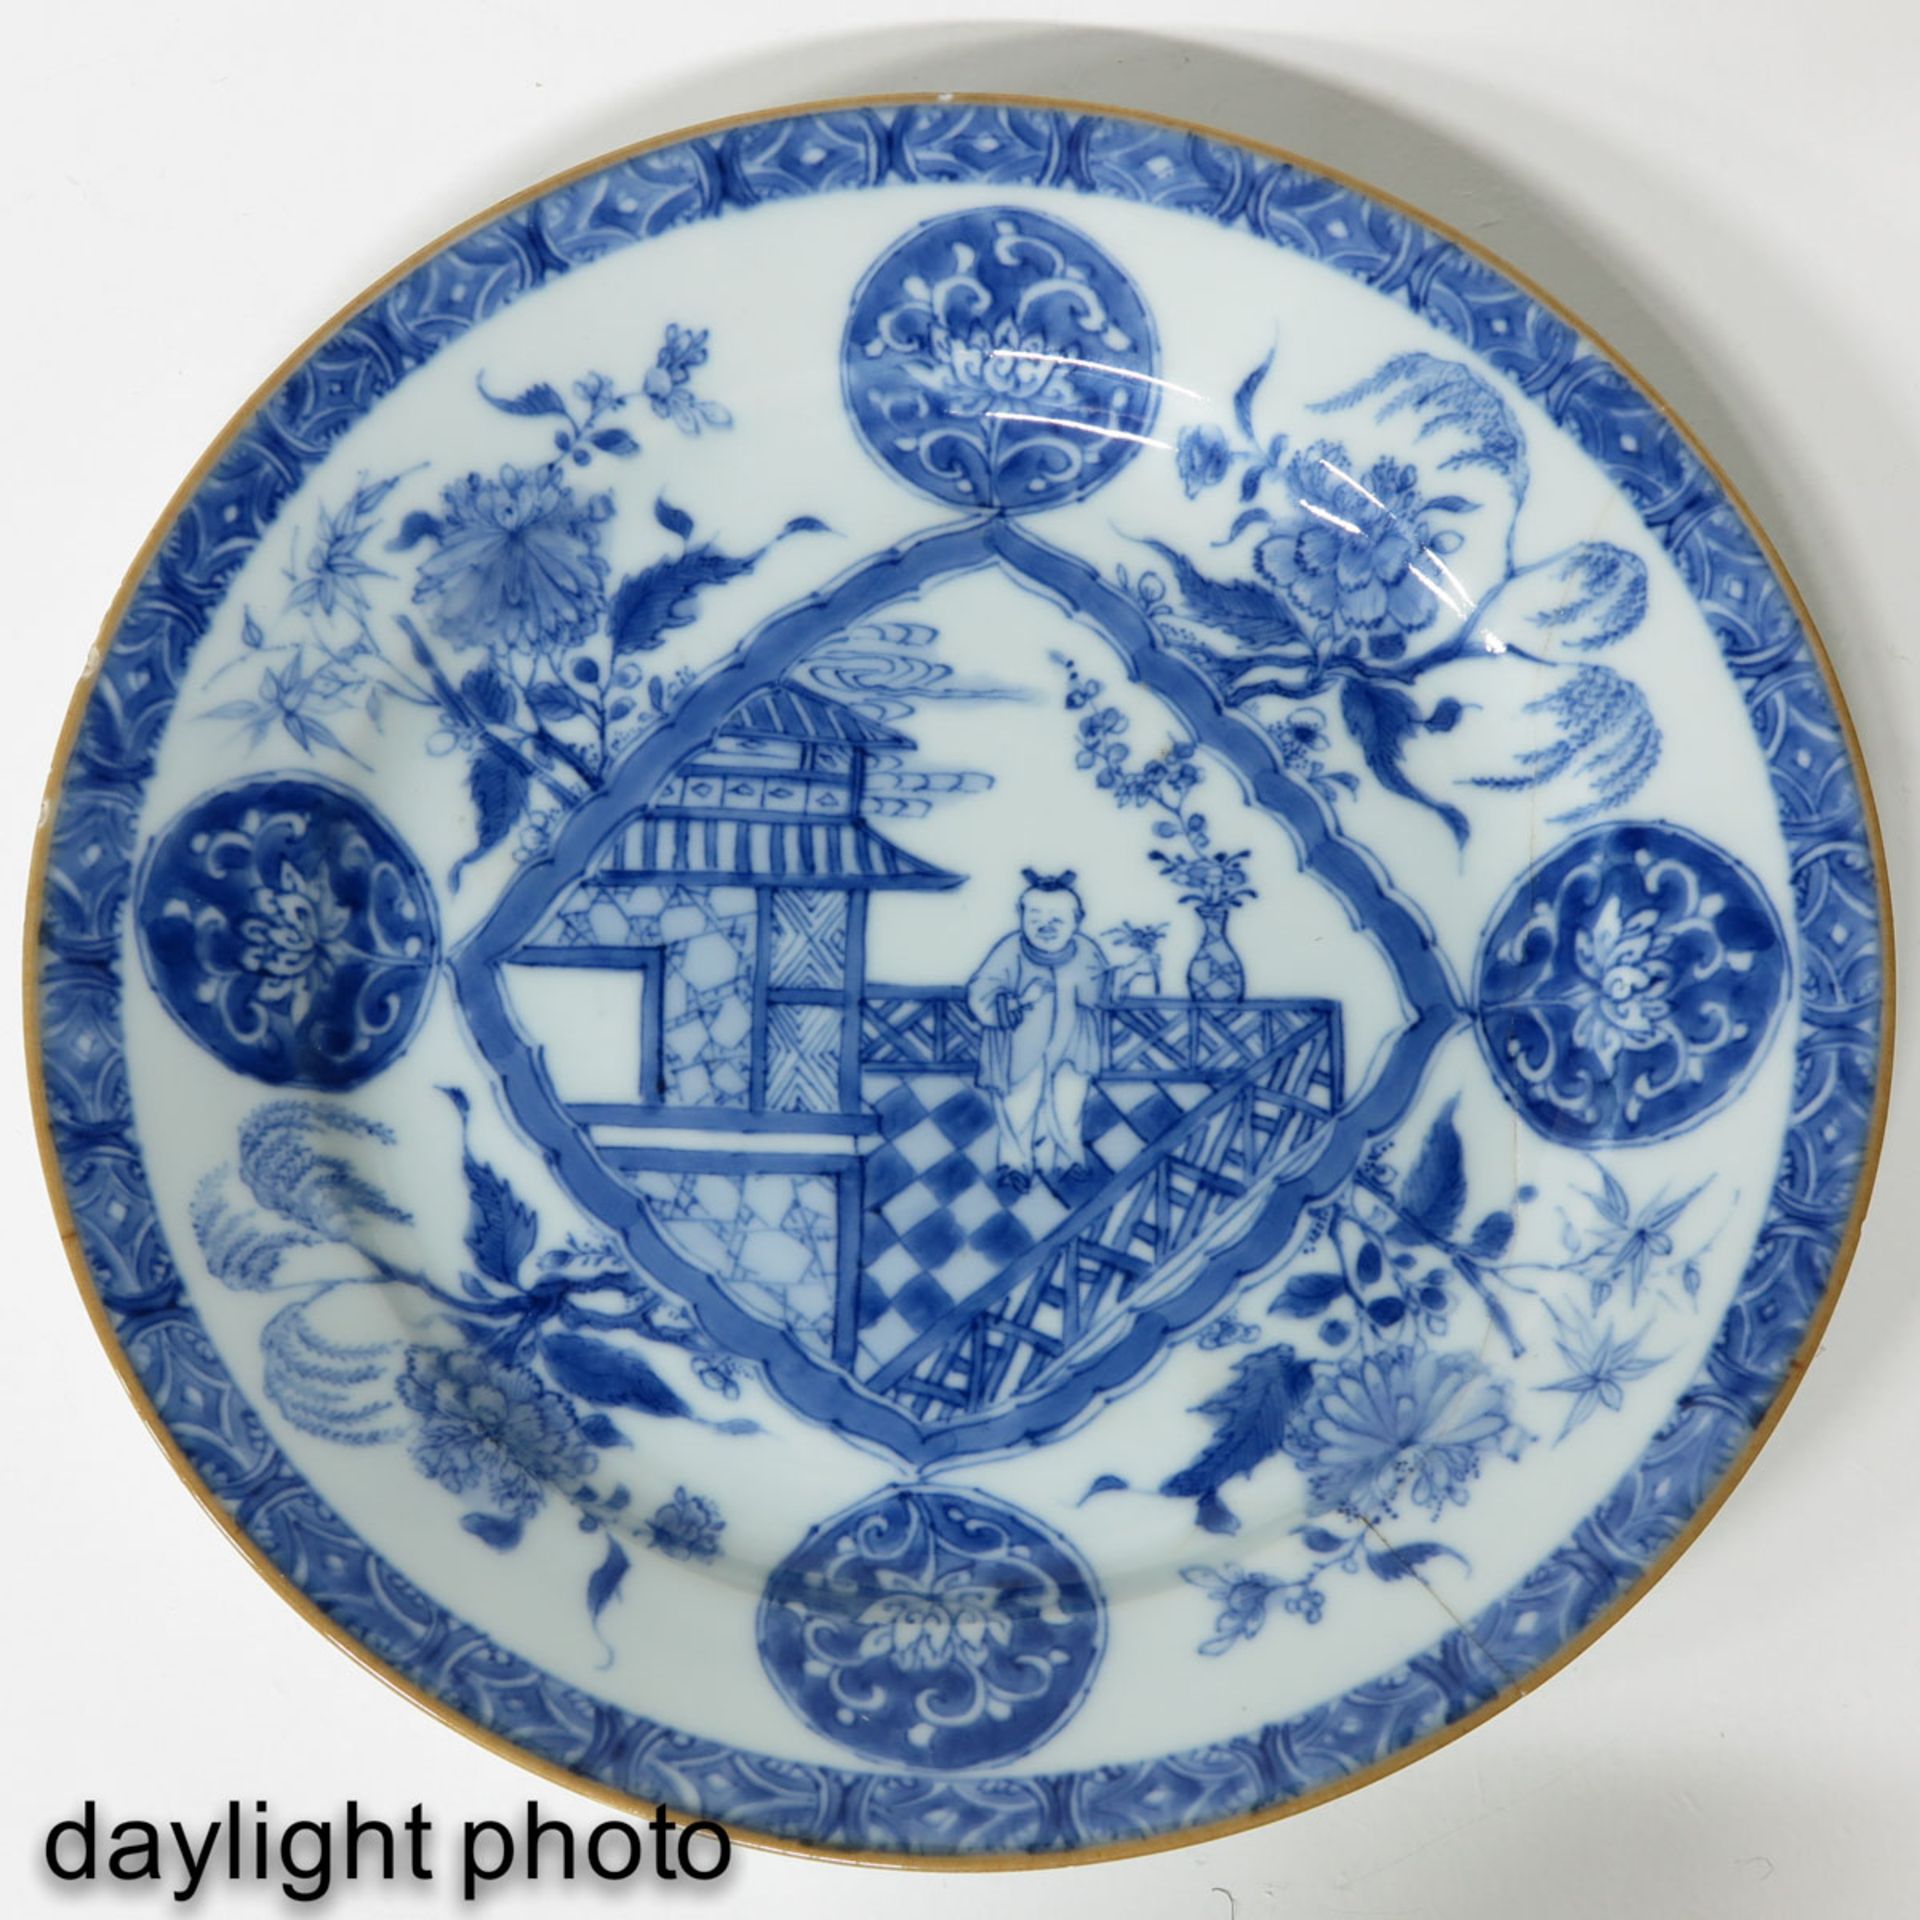 A Series of 4 Blue and white Plates - Image 7 of 9